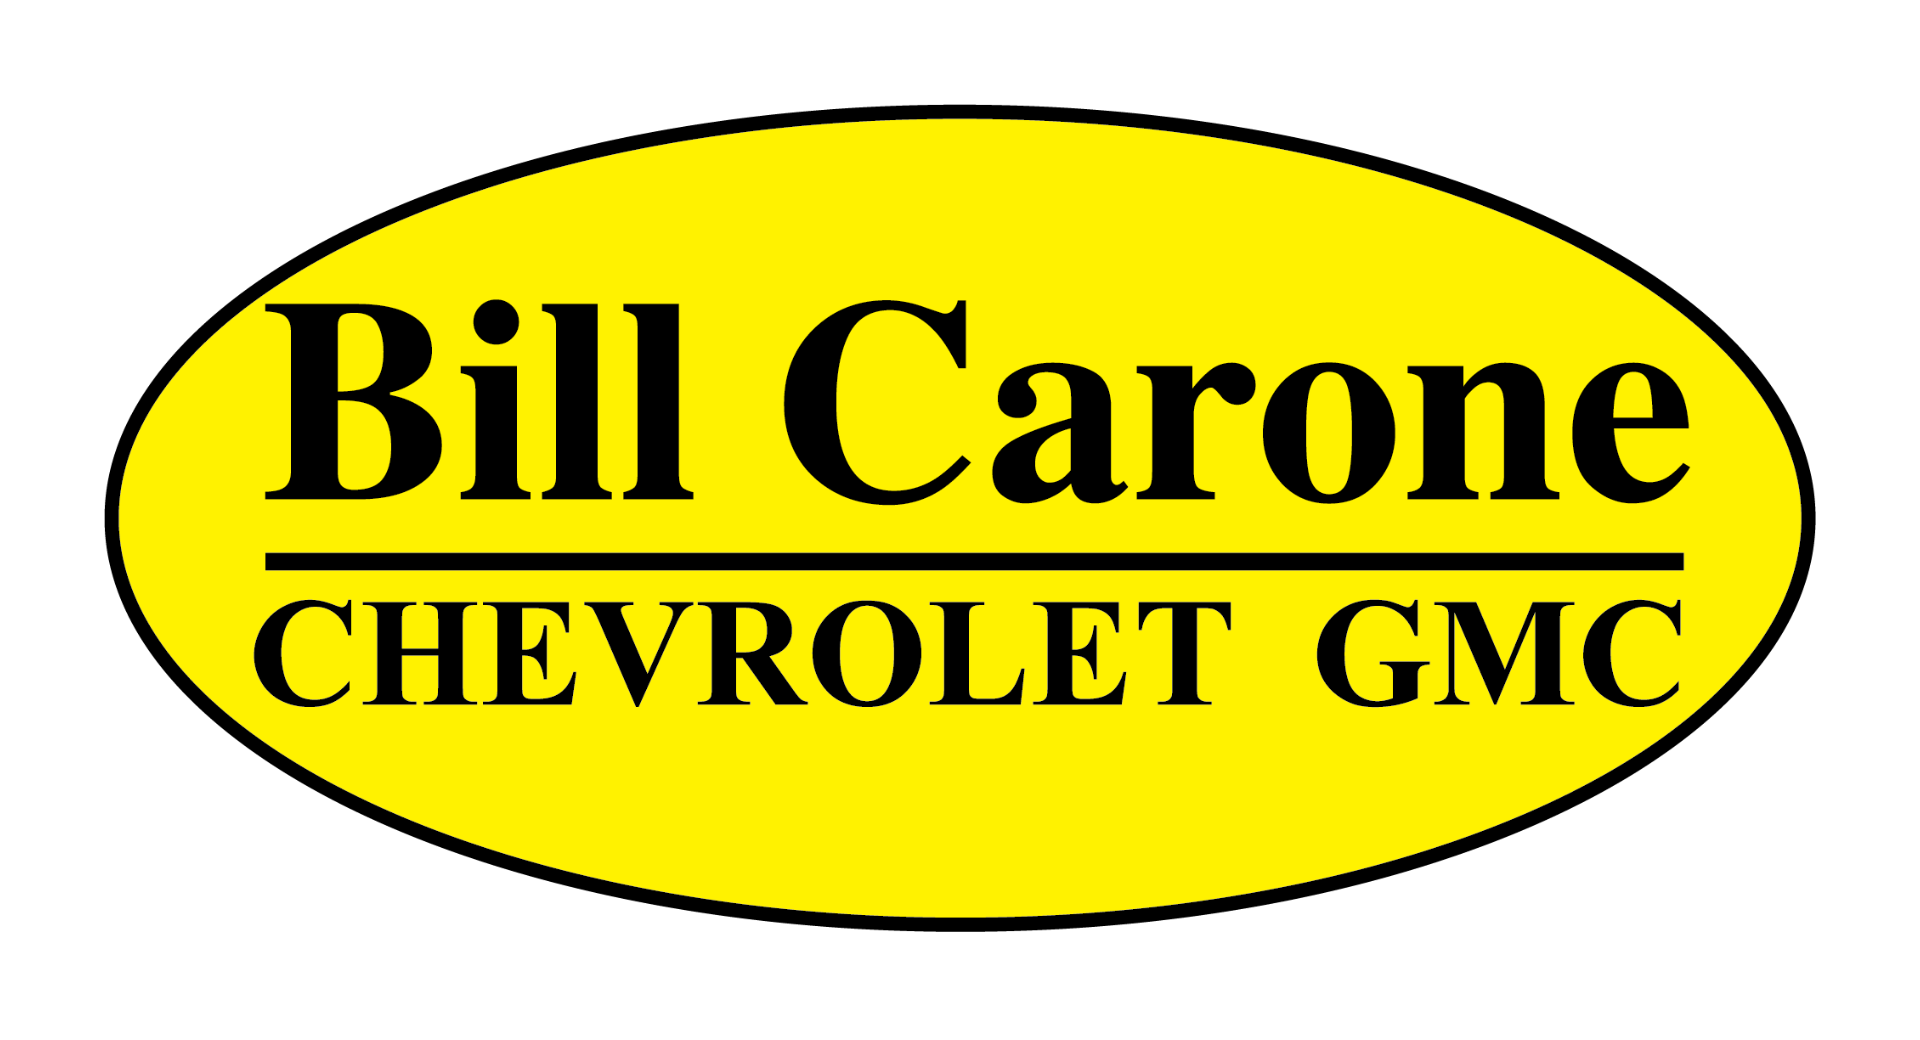 Bill Carone Chevrolet GMC is a Certified Agriculture Dealership.